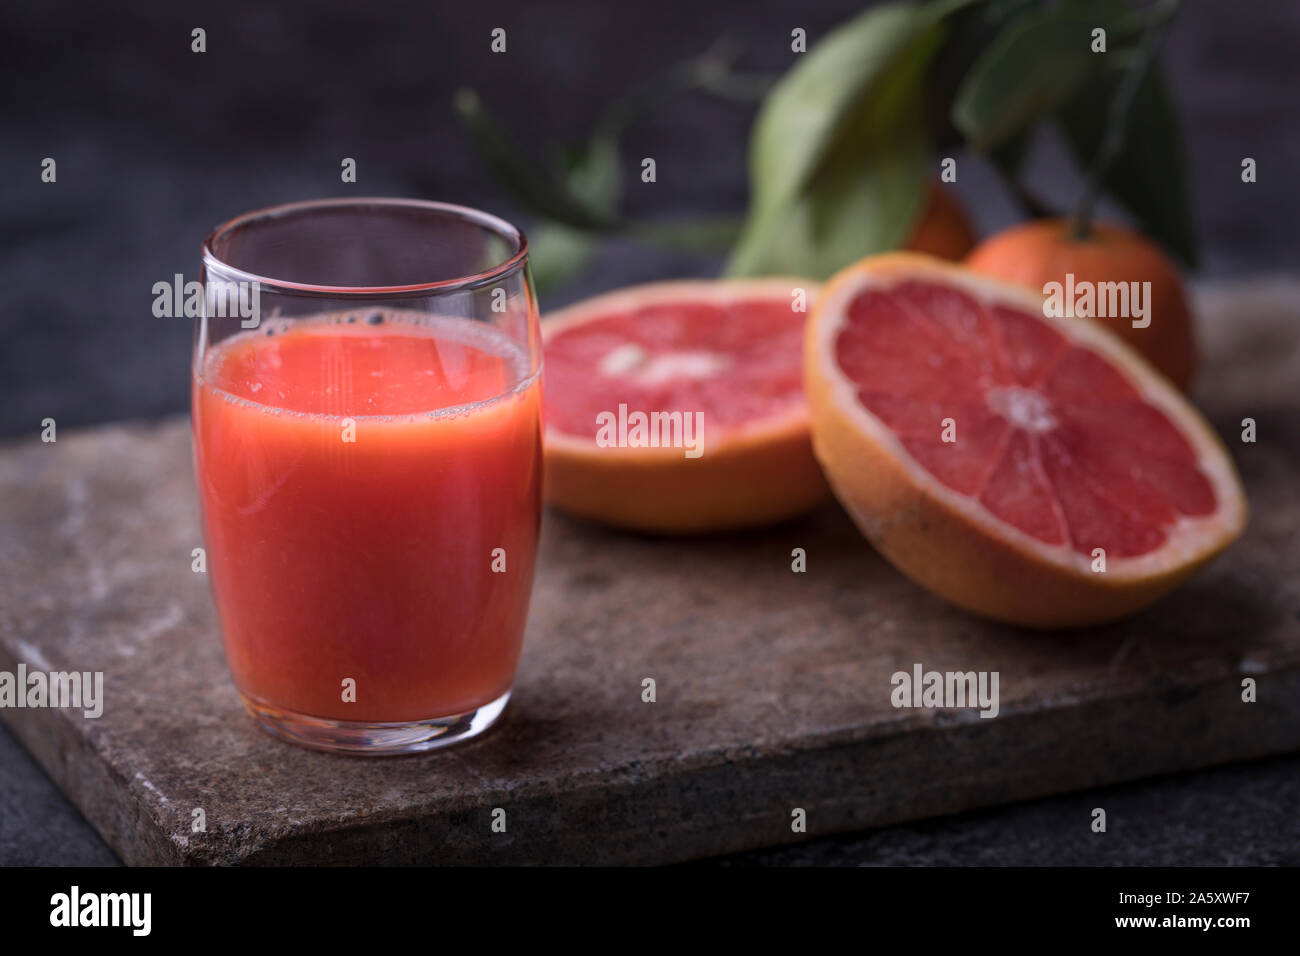 Healthy organic blood orange juice with blood grapefruit and oranges on a dark stone surface. Dark background, with defocused fruit leaves. Stock Photo